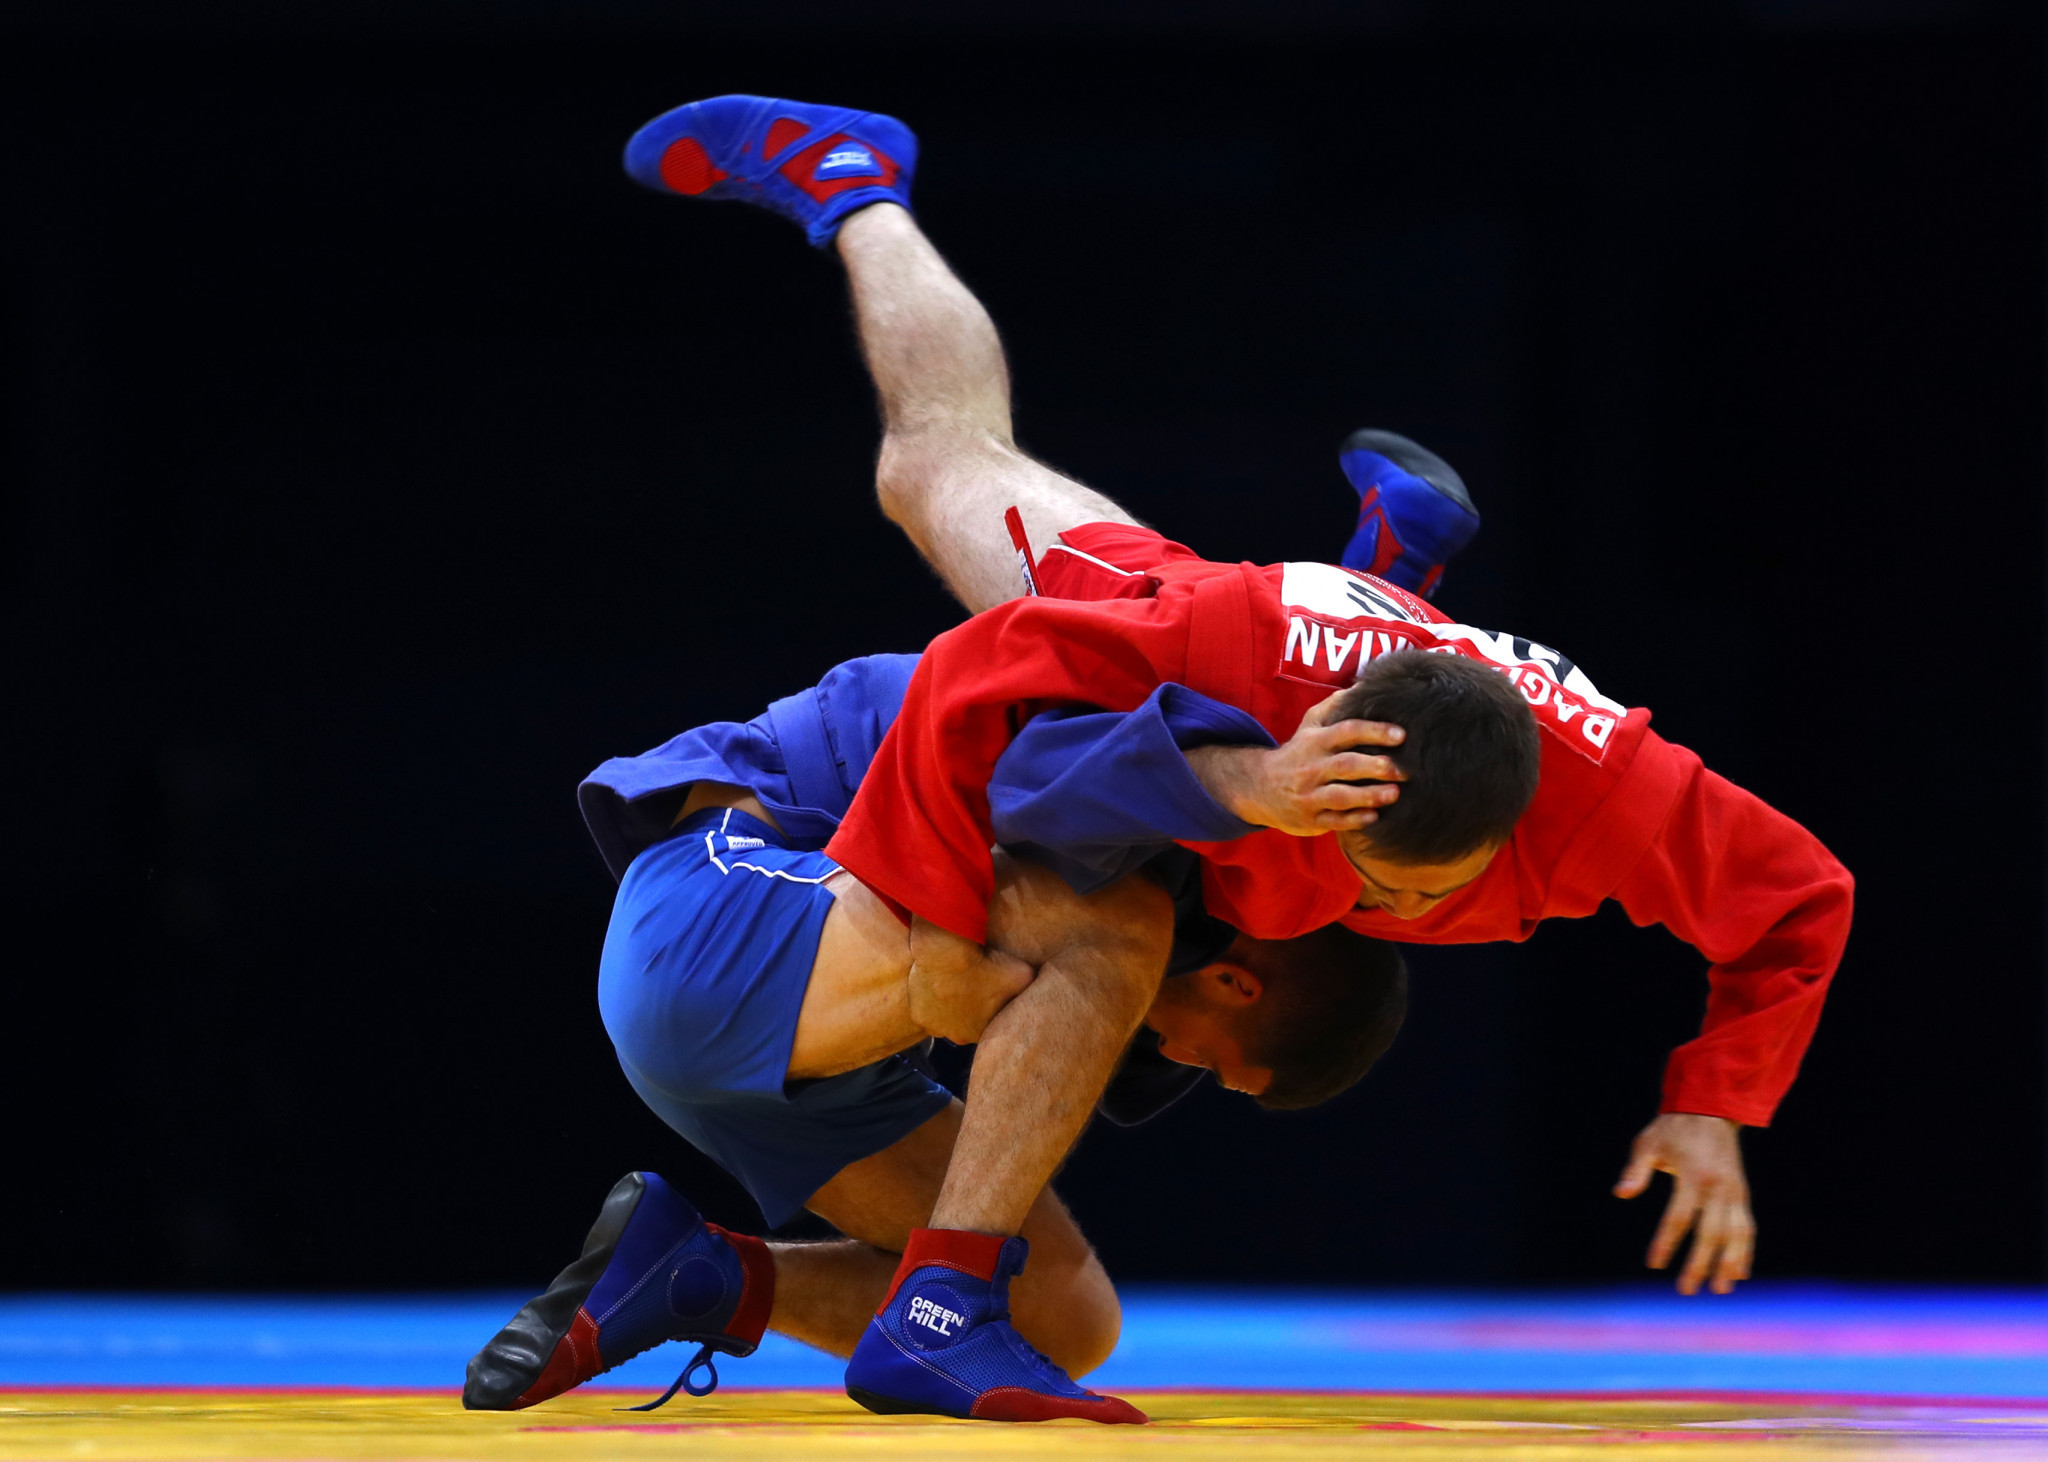 International Sambo Federation plans four World Cups on four continents